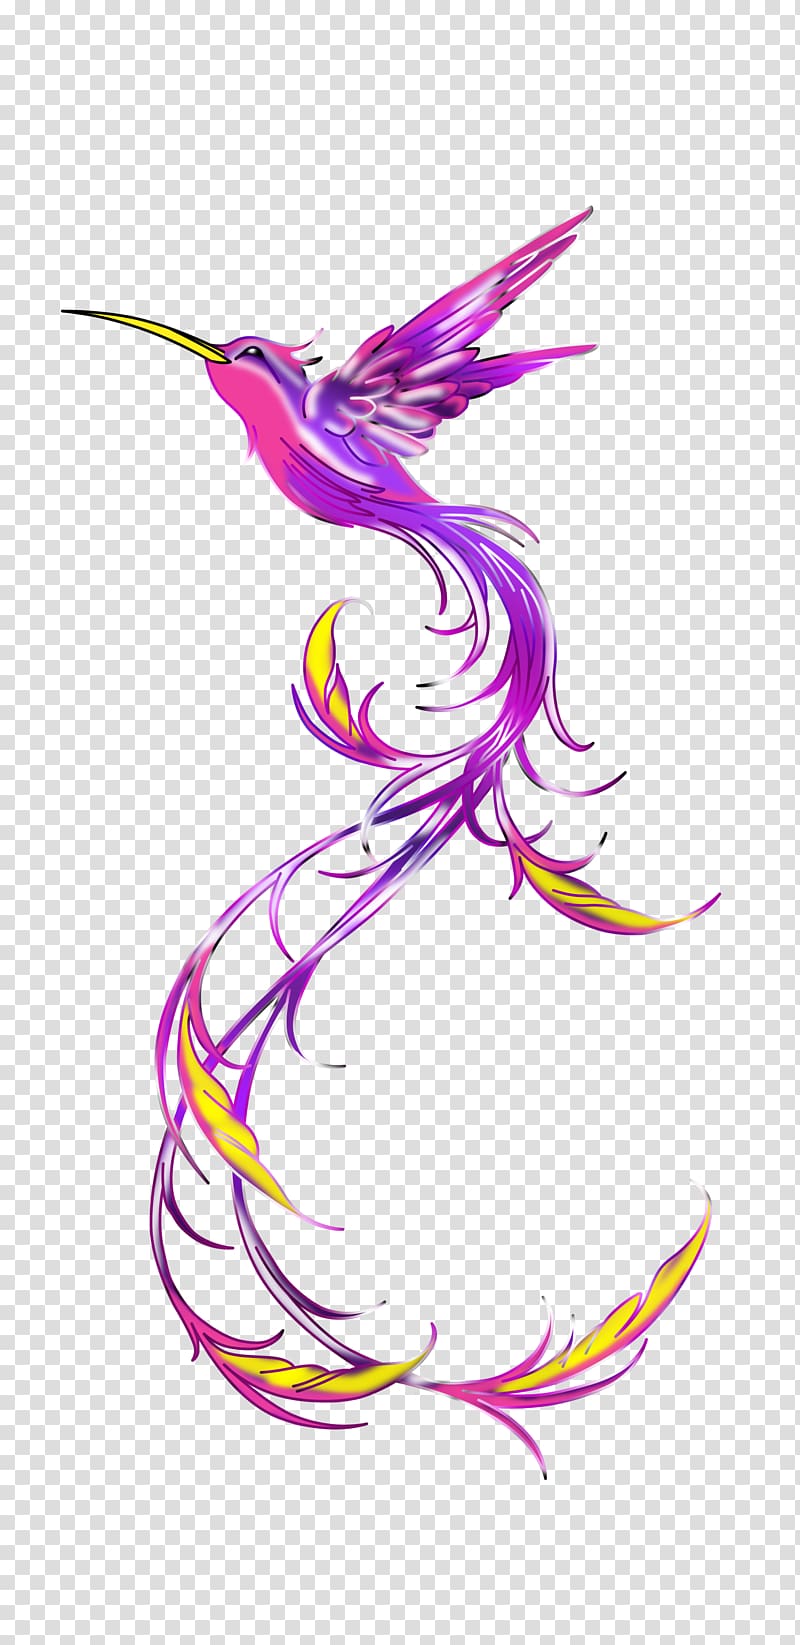 Hummingbird Tattoo Feather , purple dream transparent background PNG clipart